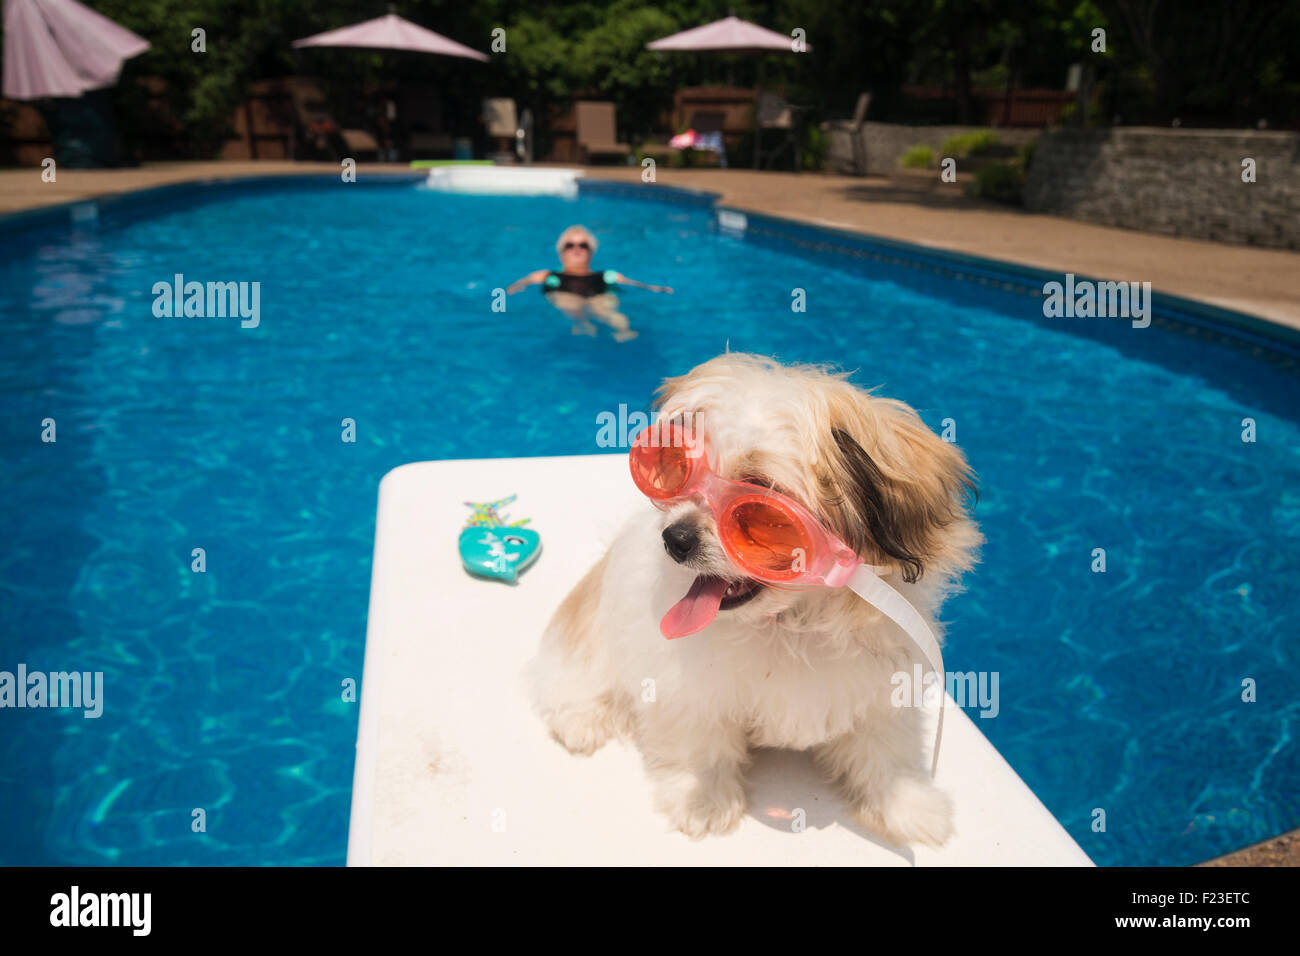 Little white dog sits on the diving board of a residential swimming pool wearing pink swim goggles while a senior woman floats Stock Photo